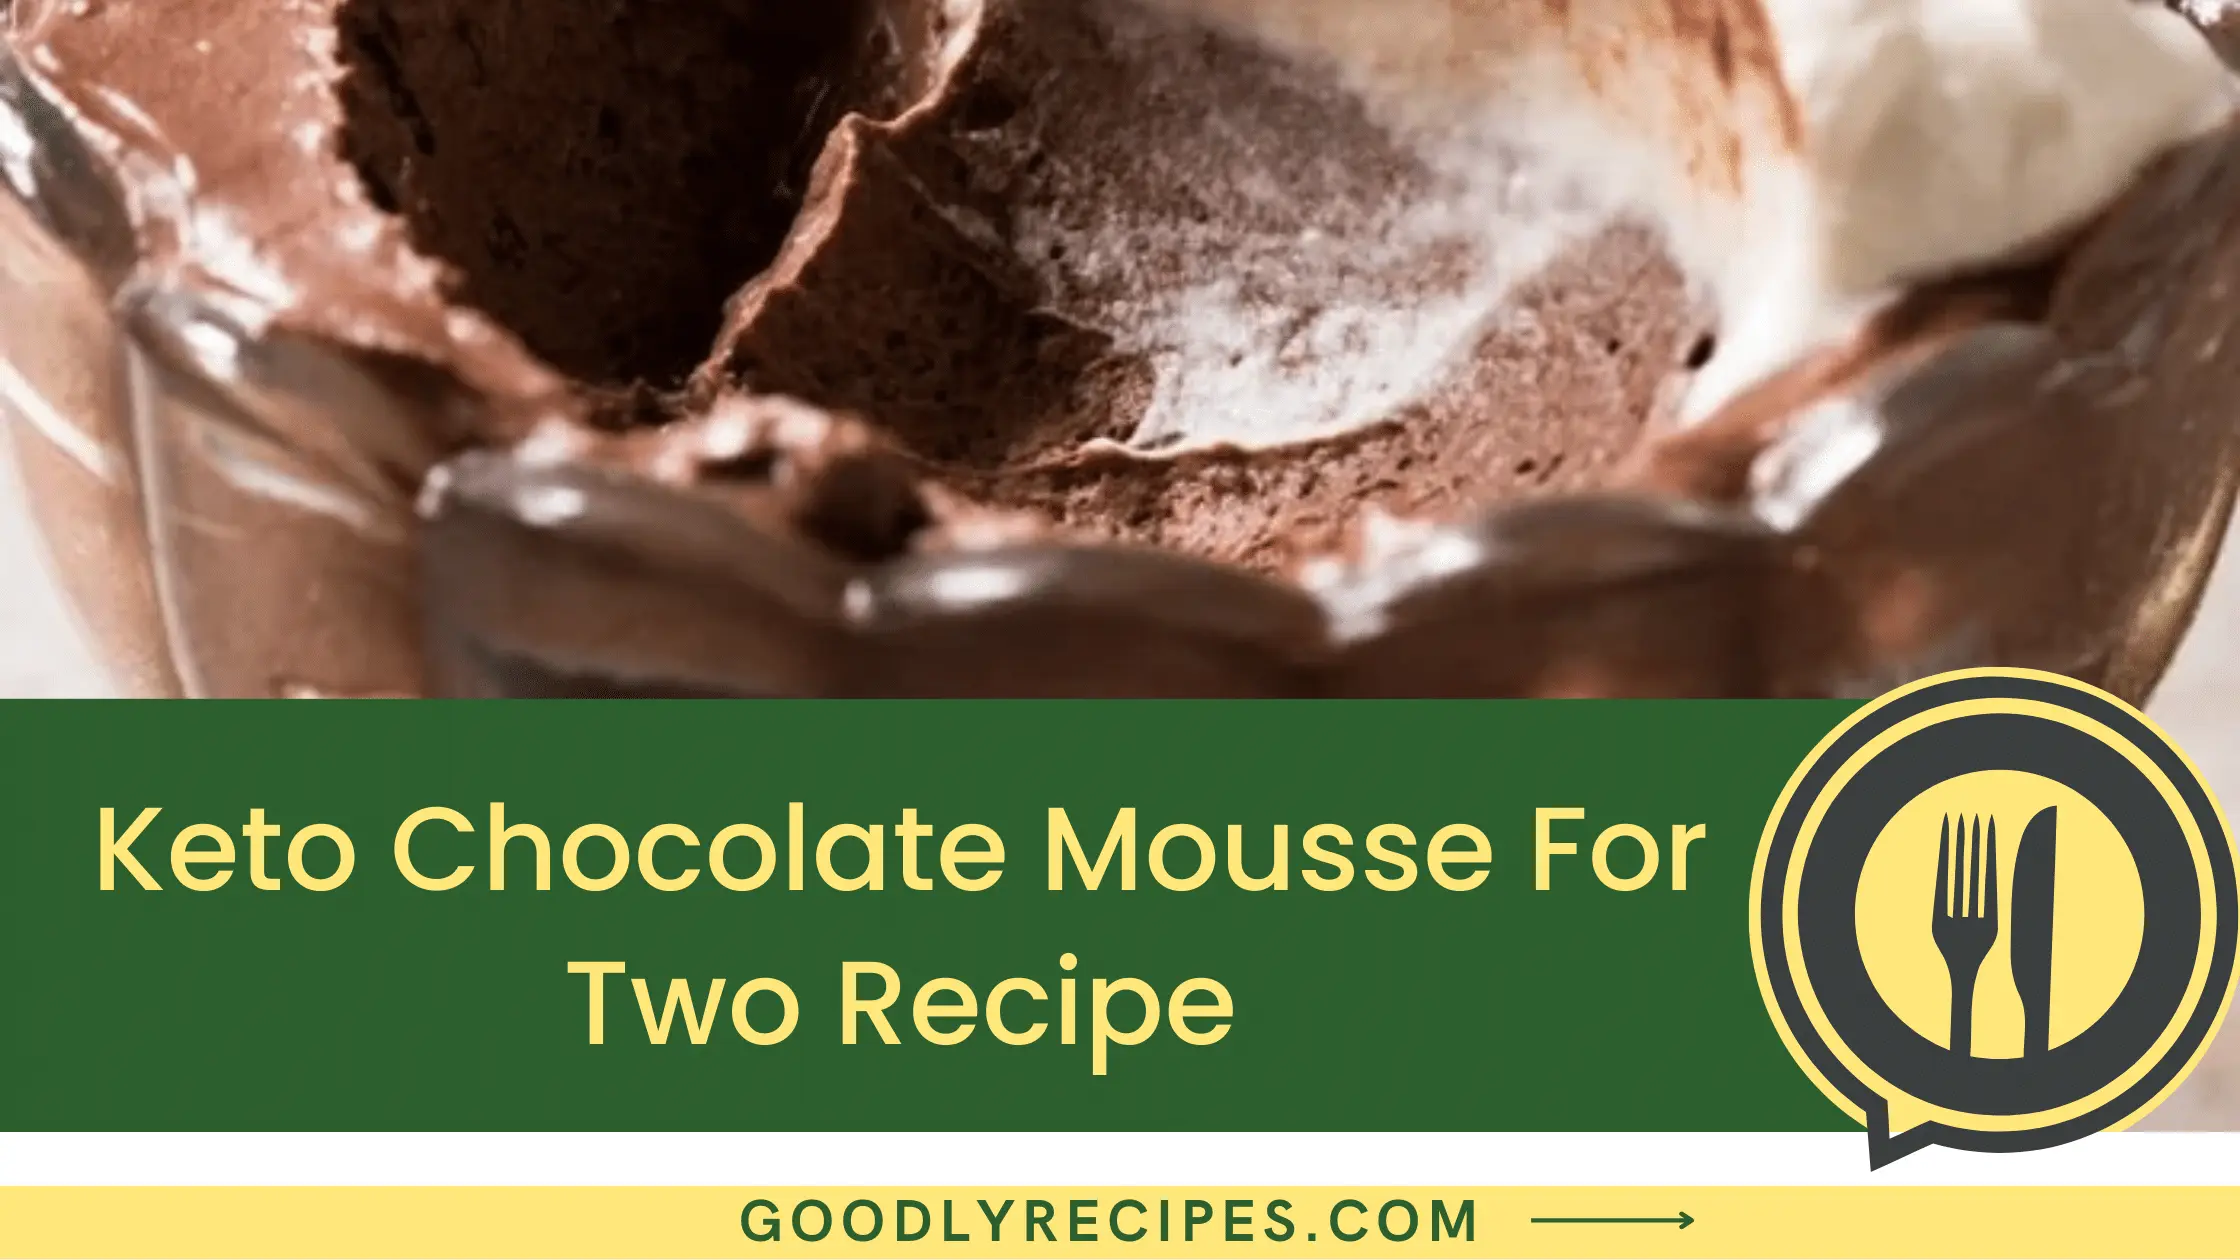 What is Keto Chocolate Mousse For Two Recipe?